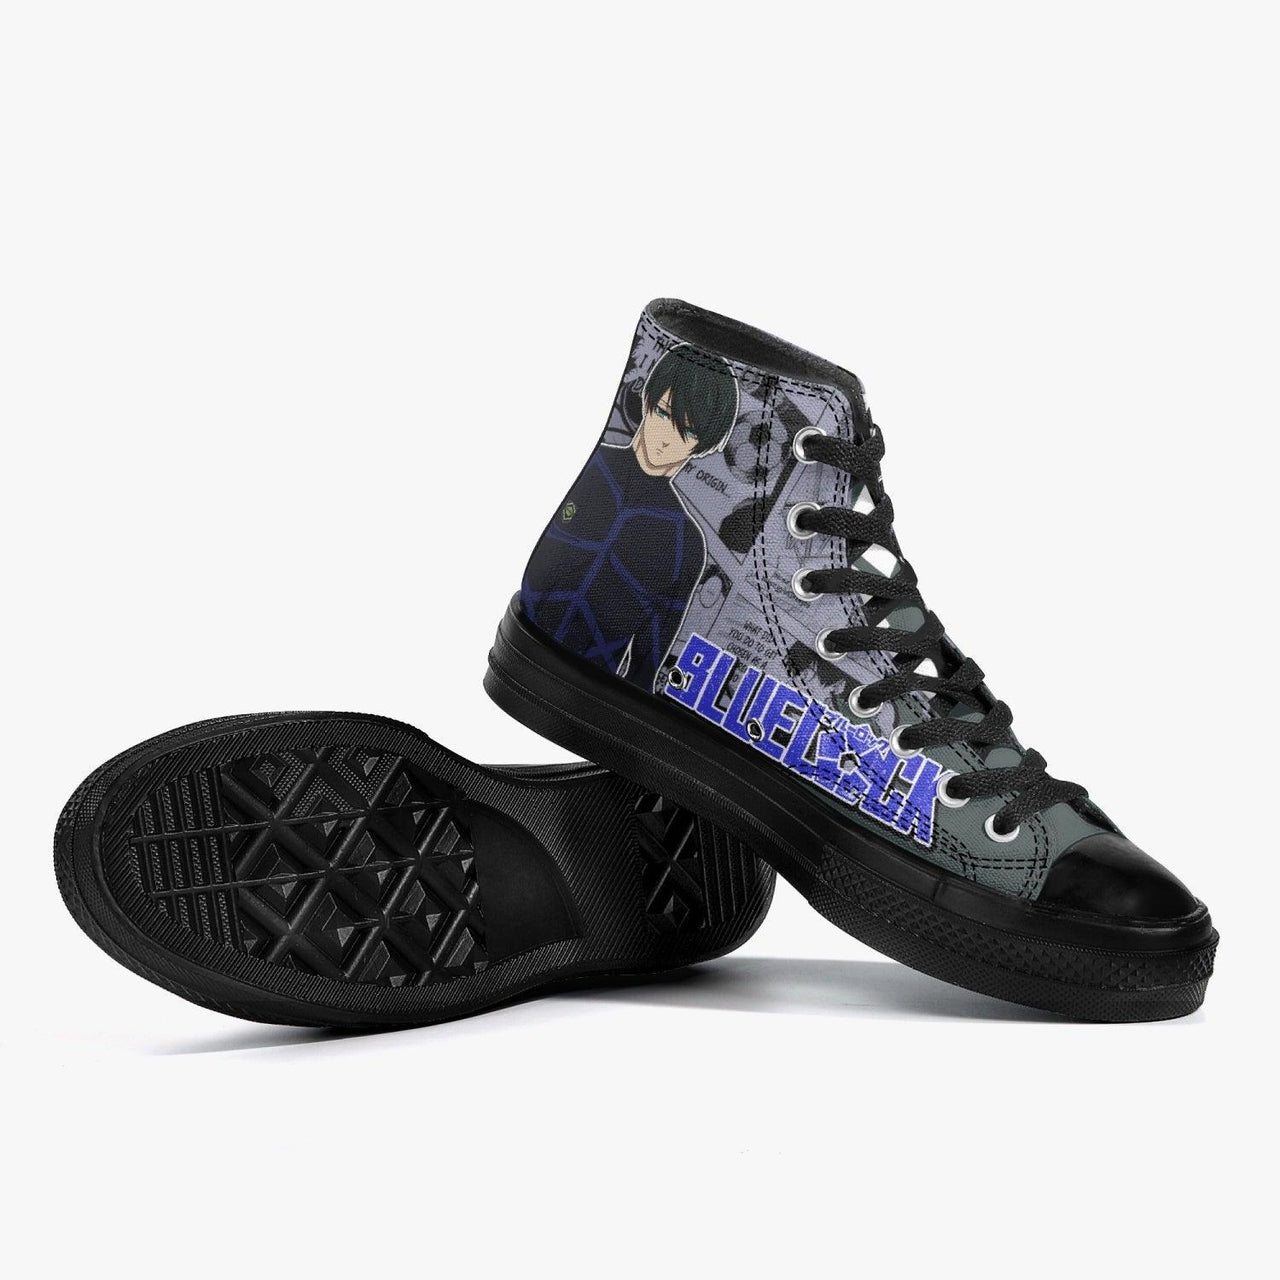 Bulkbuy Red Cool Anime Low Top Casual Sneakers Men S Fashion Cartoon  Design Flat Shoes price comparison